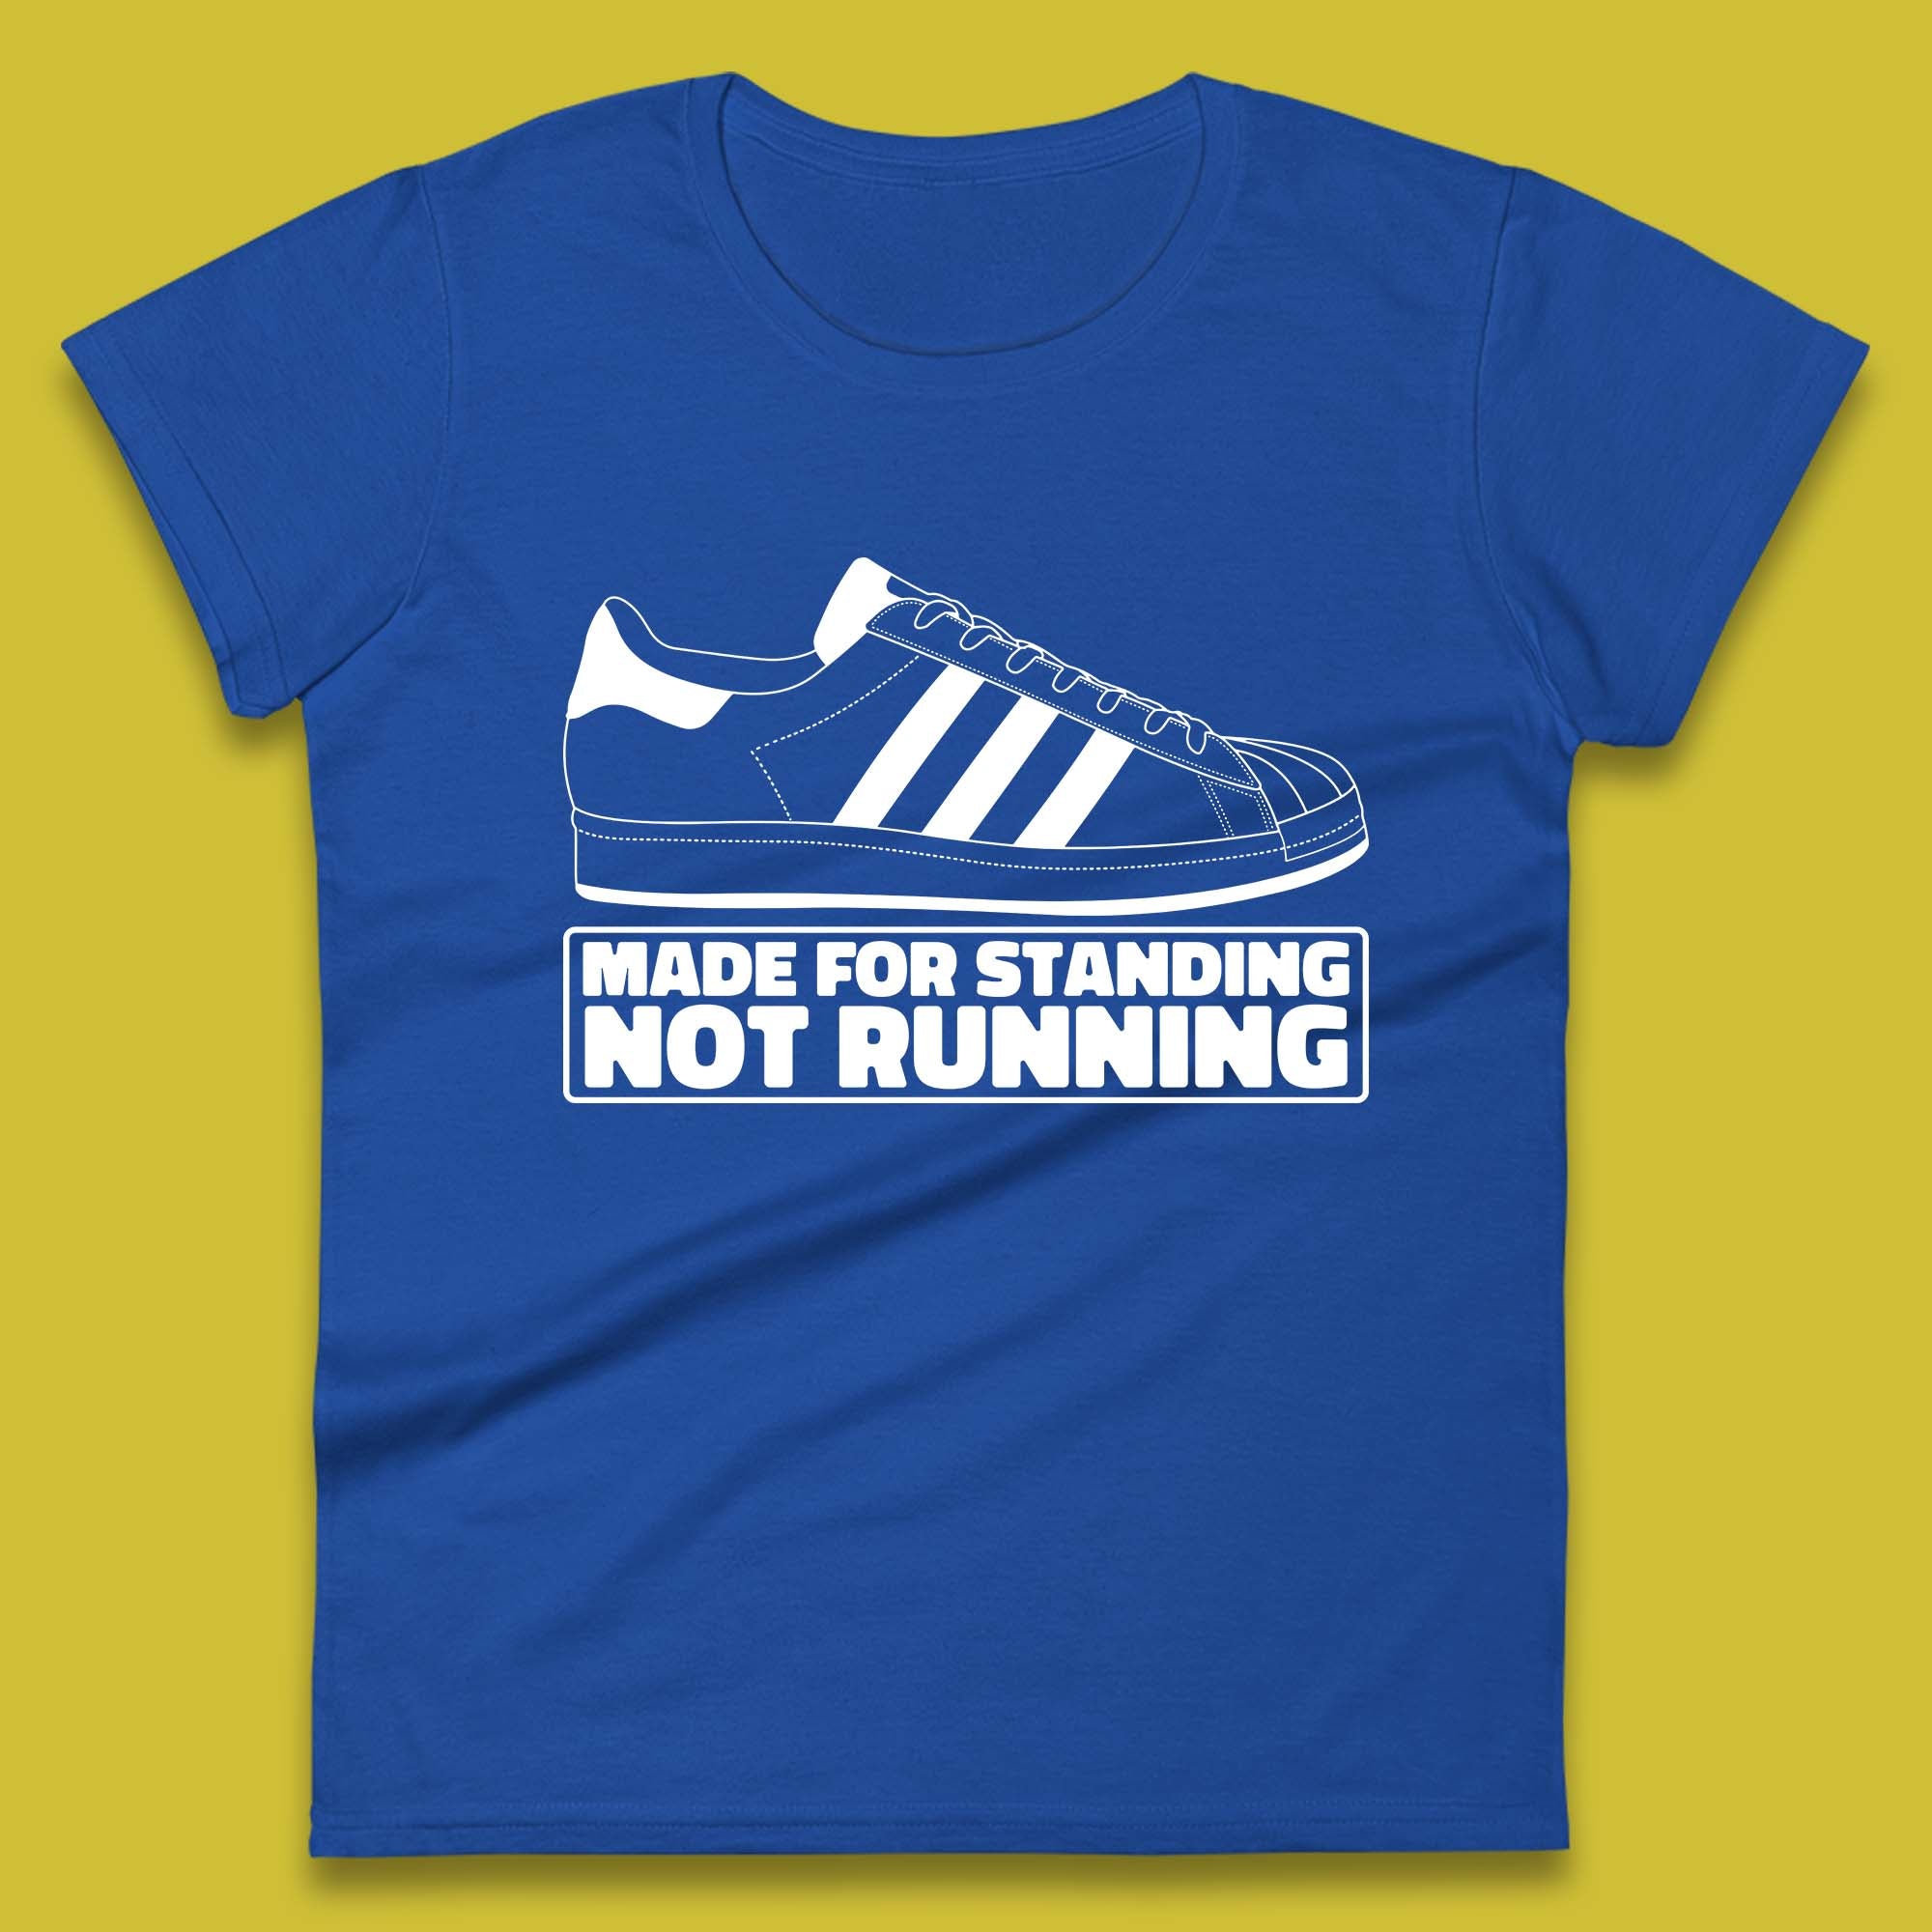 Made For Standing Not Running Football Hooligan Trimm Trab Terraces Womens Tee Top